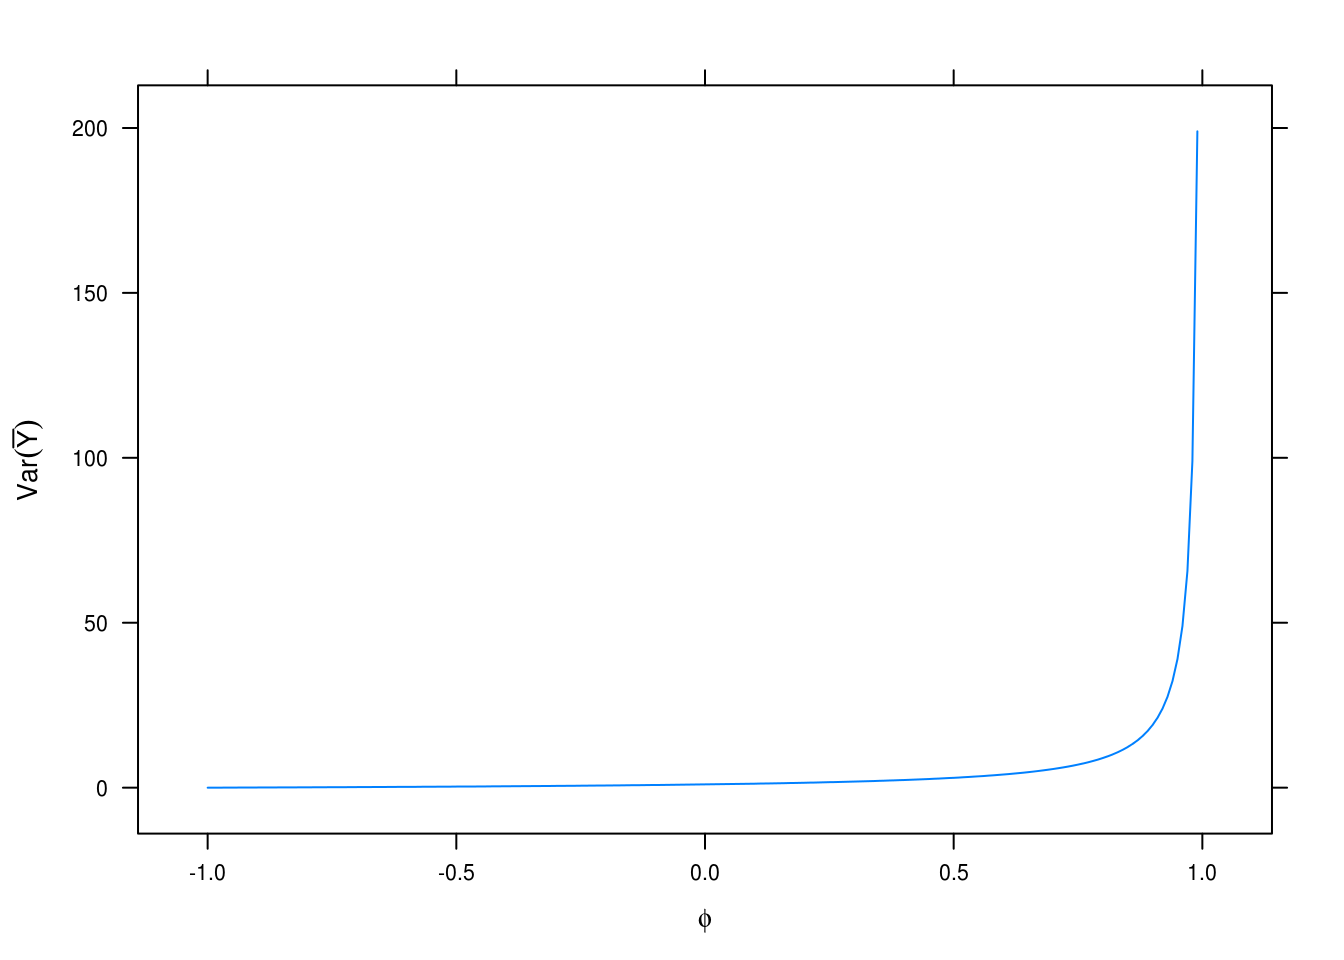 Variance estimation for different values of $\phi$.